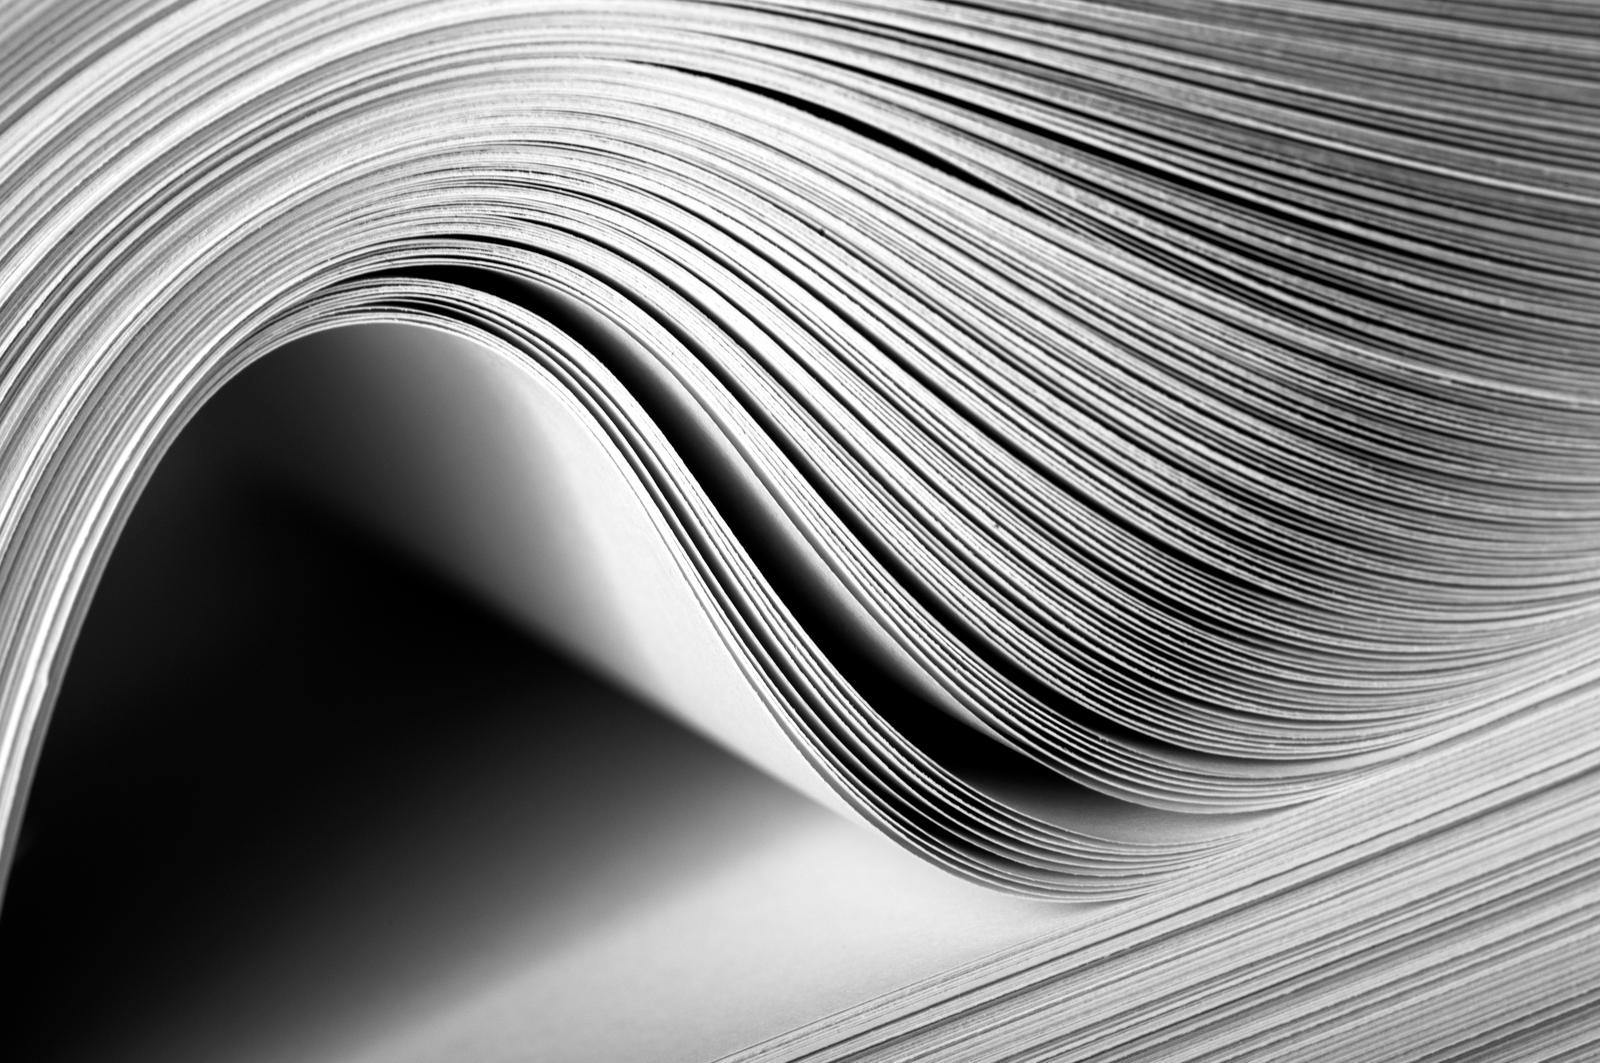 Layers of sheet metal bending together